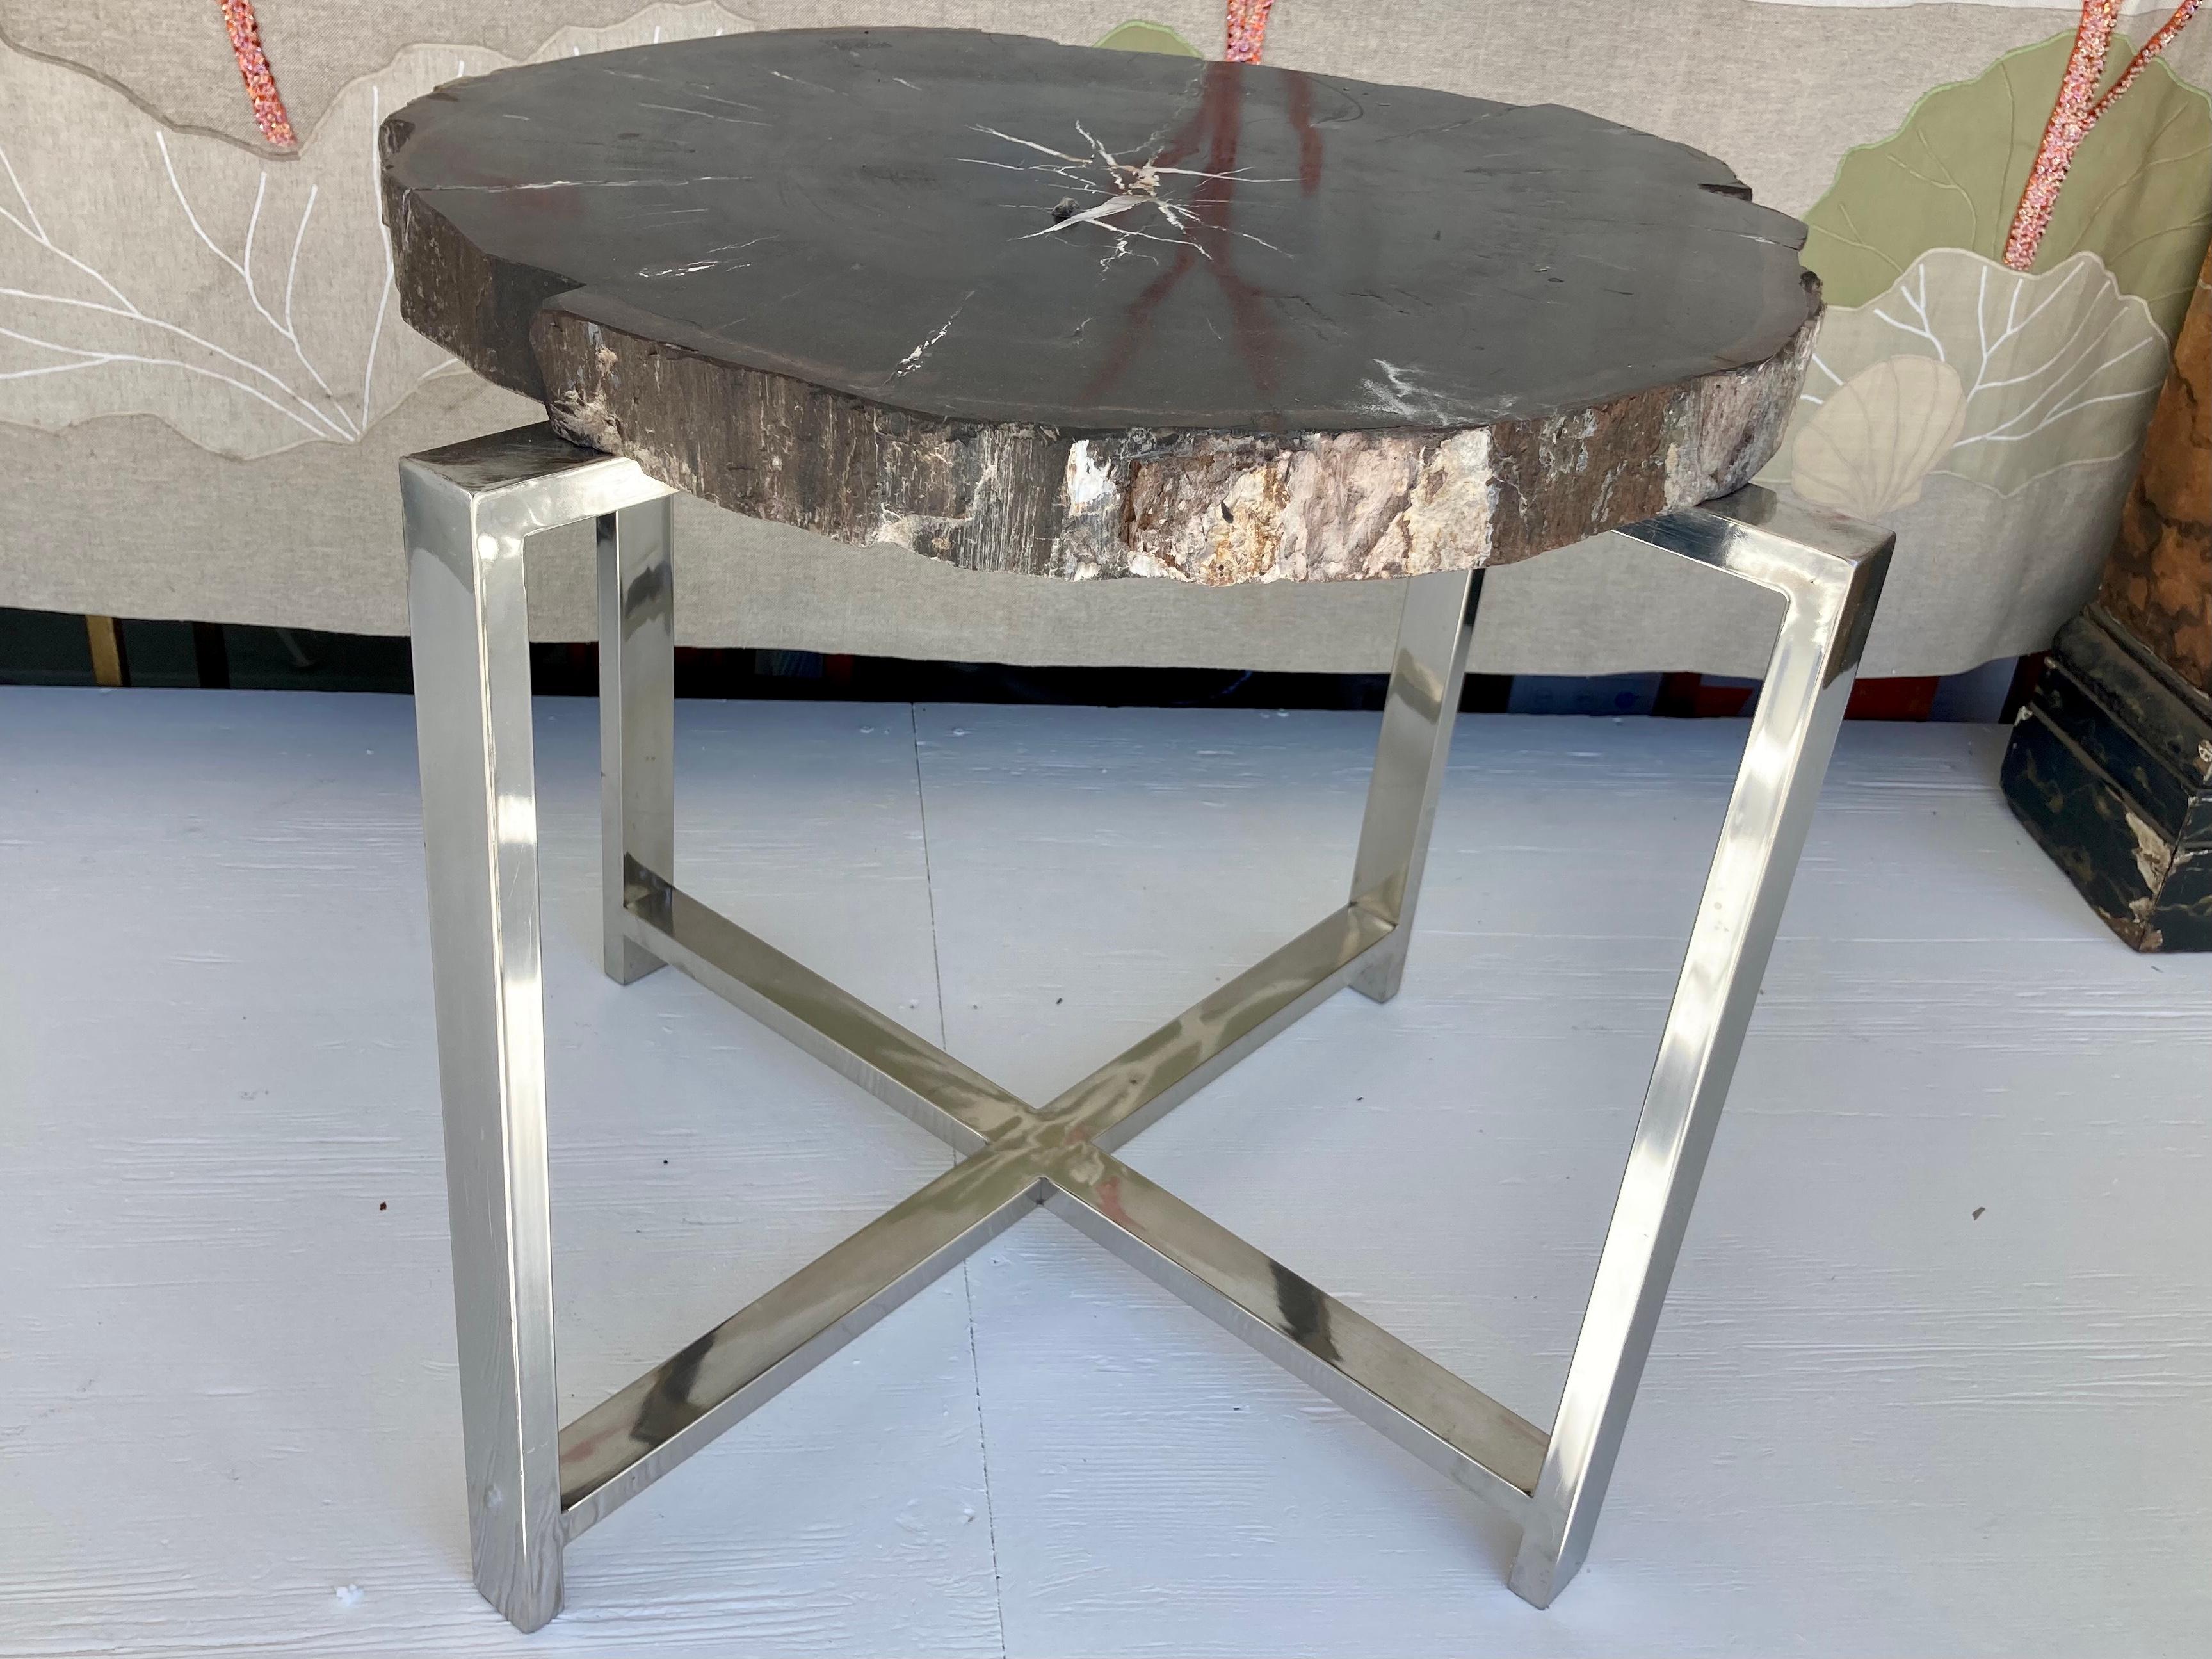 Petrified wood stone table top with custom made 4 leg chrome base. Very modern looking with gorgeous character top. Very heavy with solid chrome base. Add some history and character to your home.